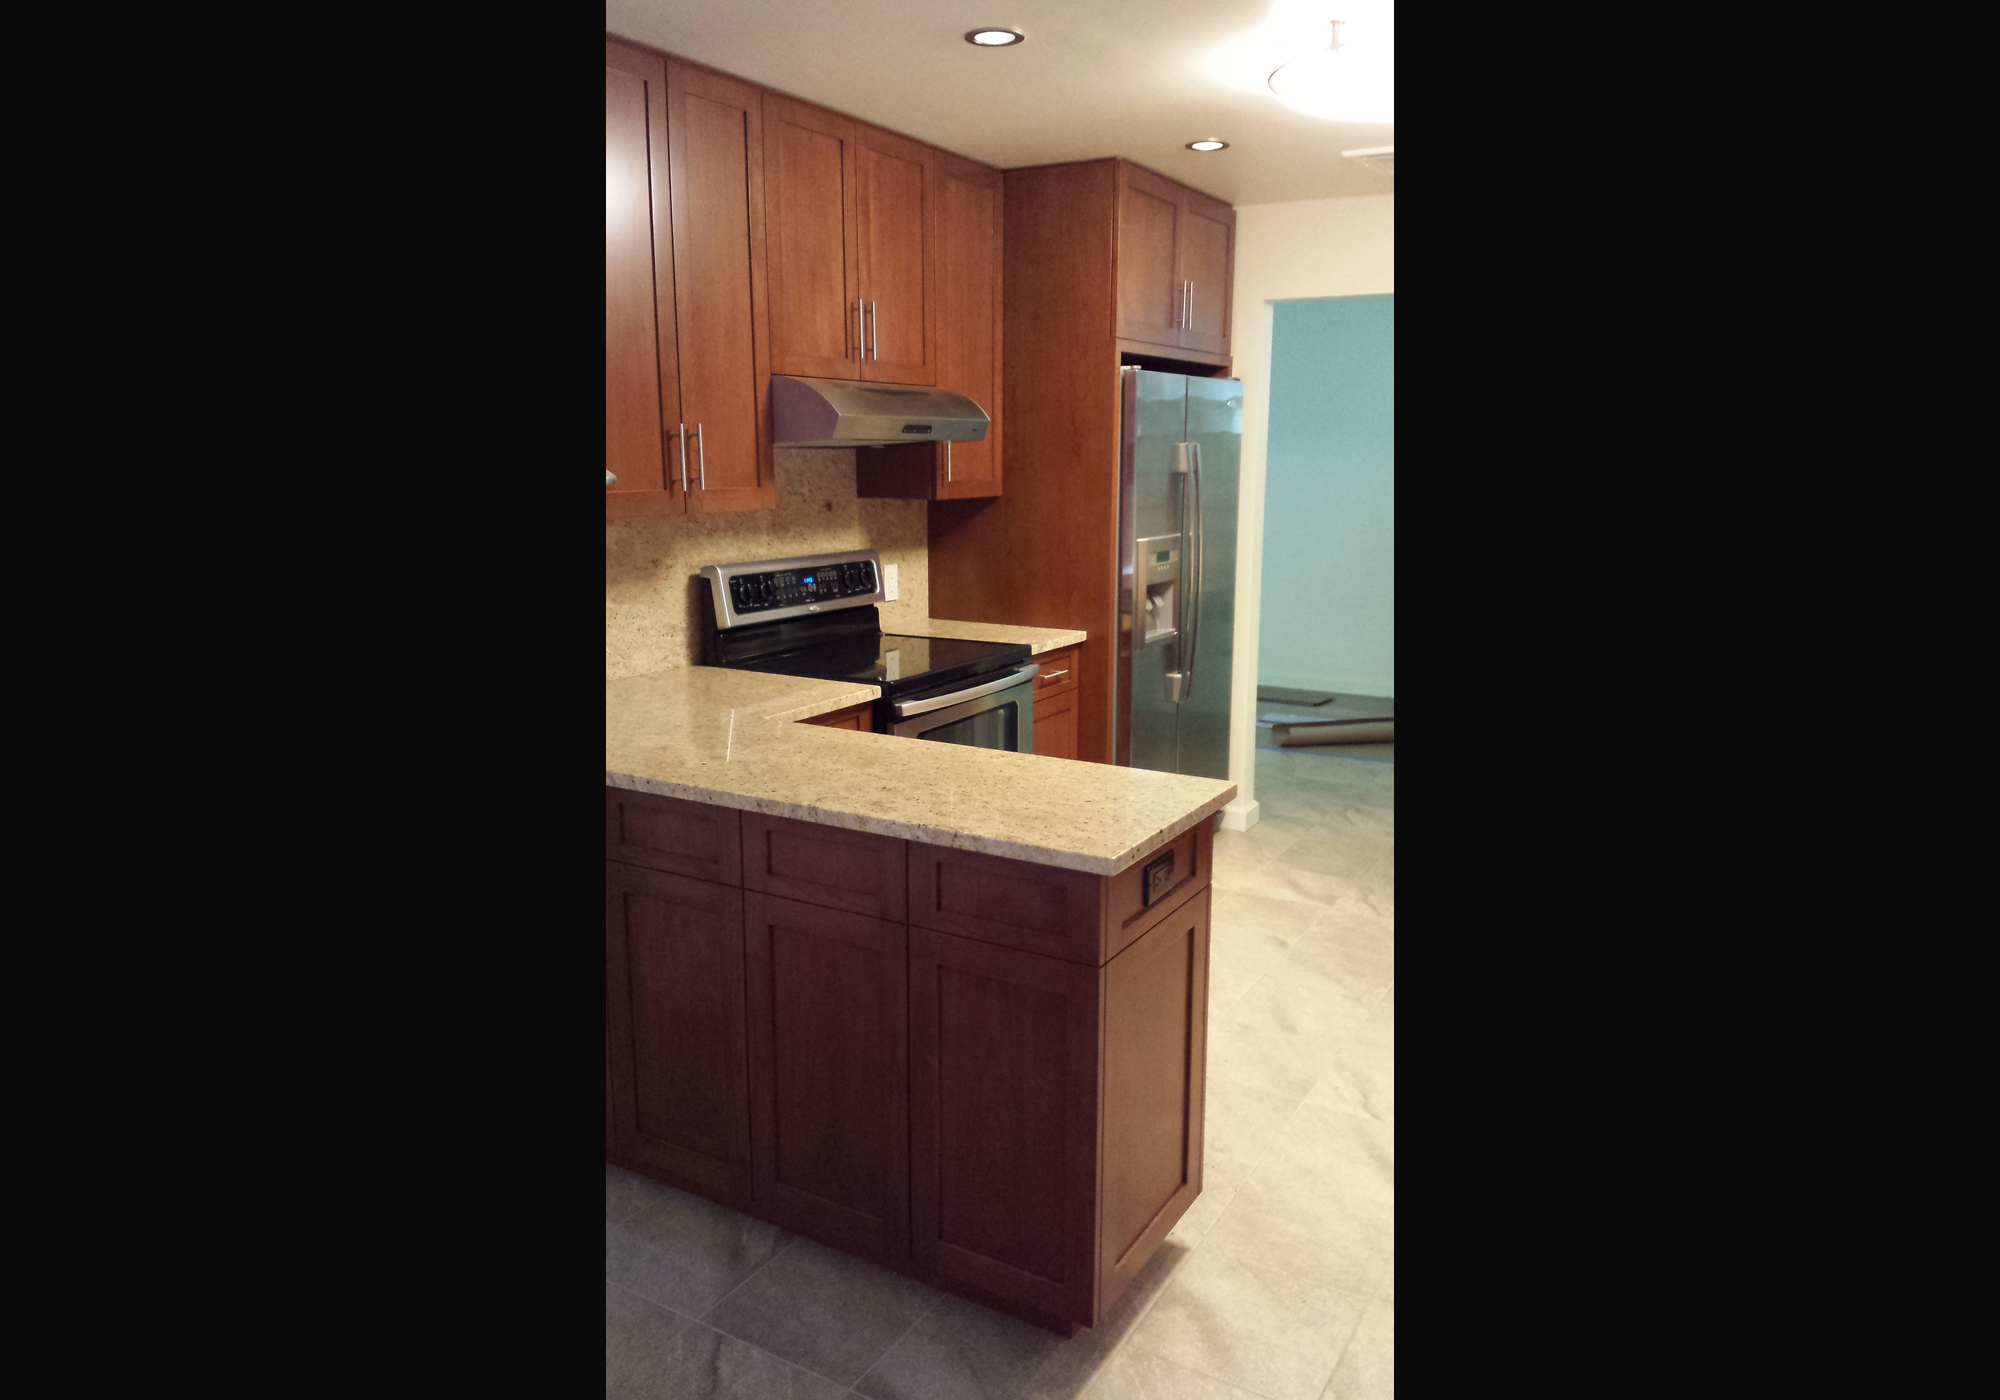 Kitchen Redesign |Long Island, NY